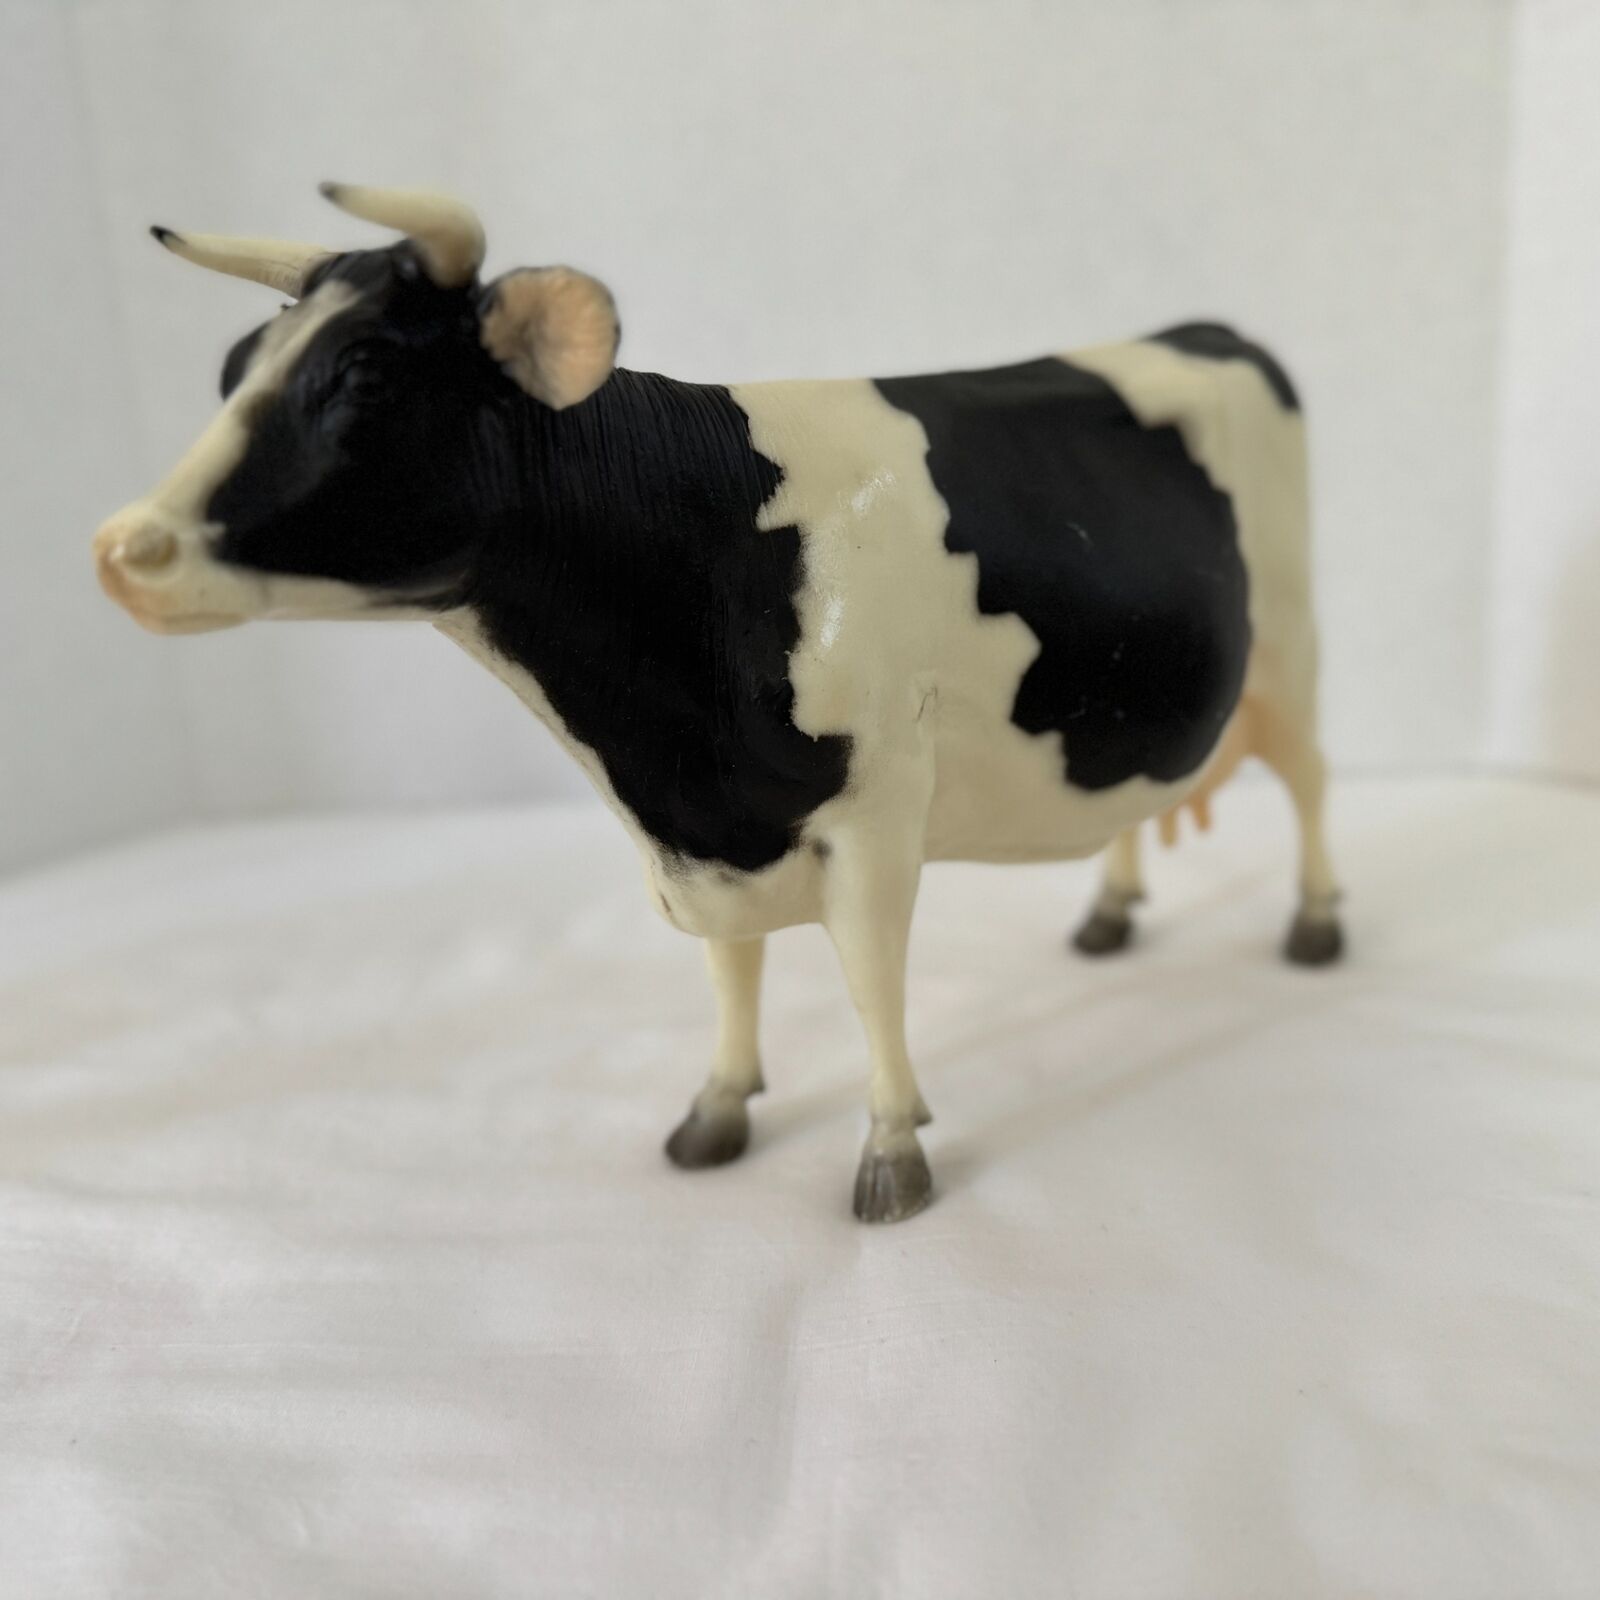 Vintage Breyer USA Black and White Holstein Cow Chess Traditional Size